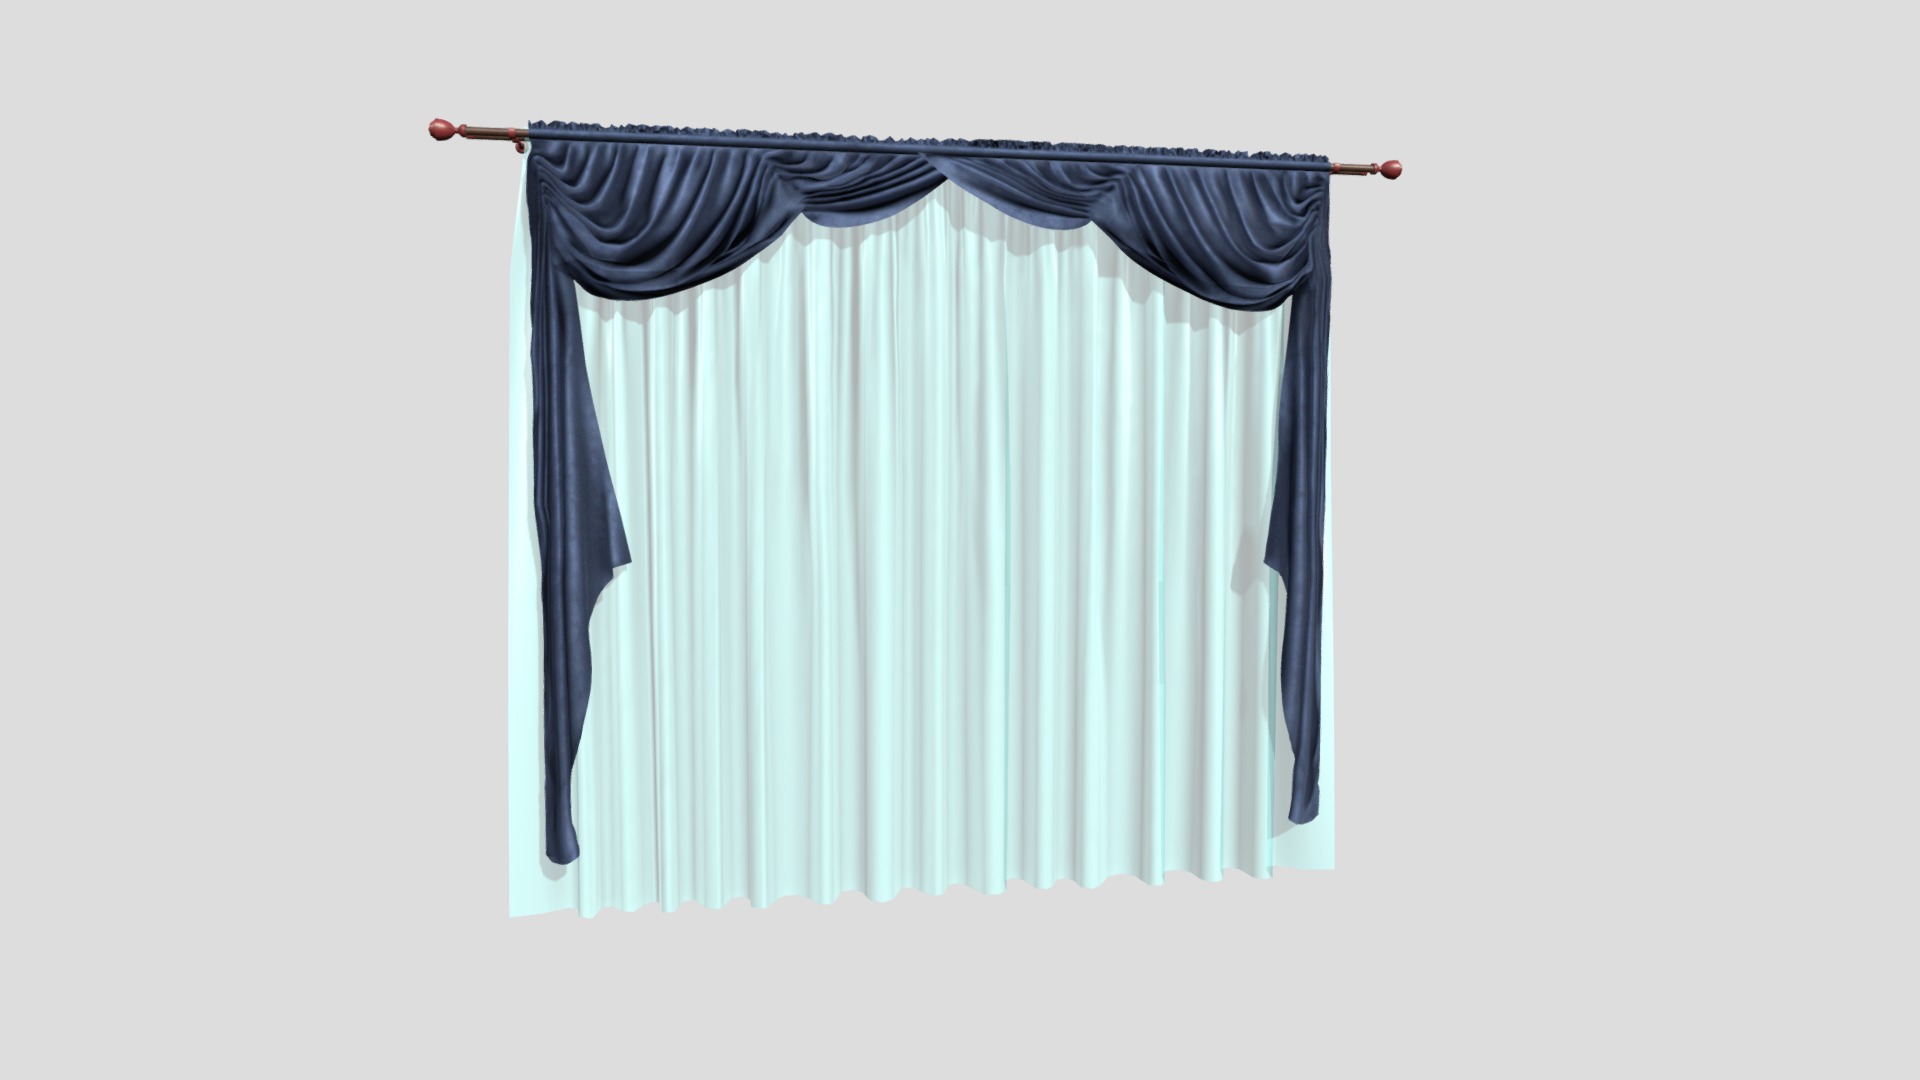 3D model №1004 Curtain 3D low poly model for VR-projects - This is a 3D model of the №1004 Curtain 3D low poly model for VR-projects. The 3D model is about a blue curtain with a black rod.